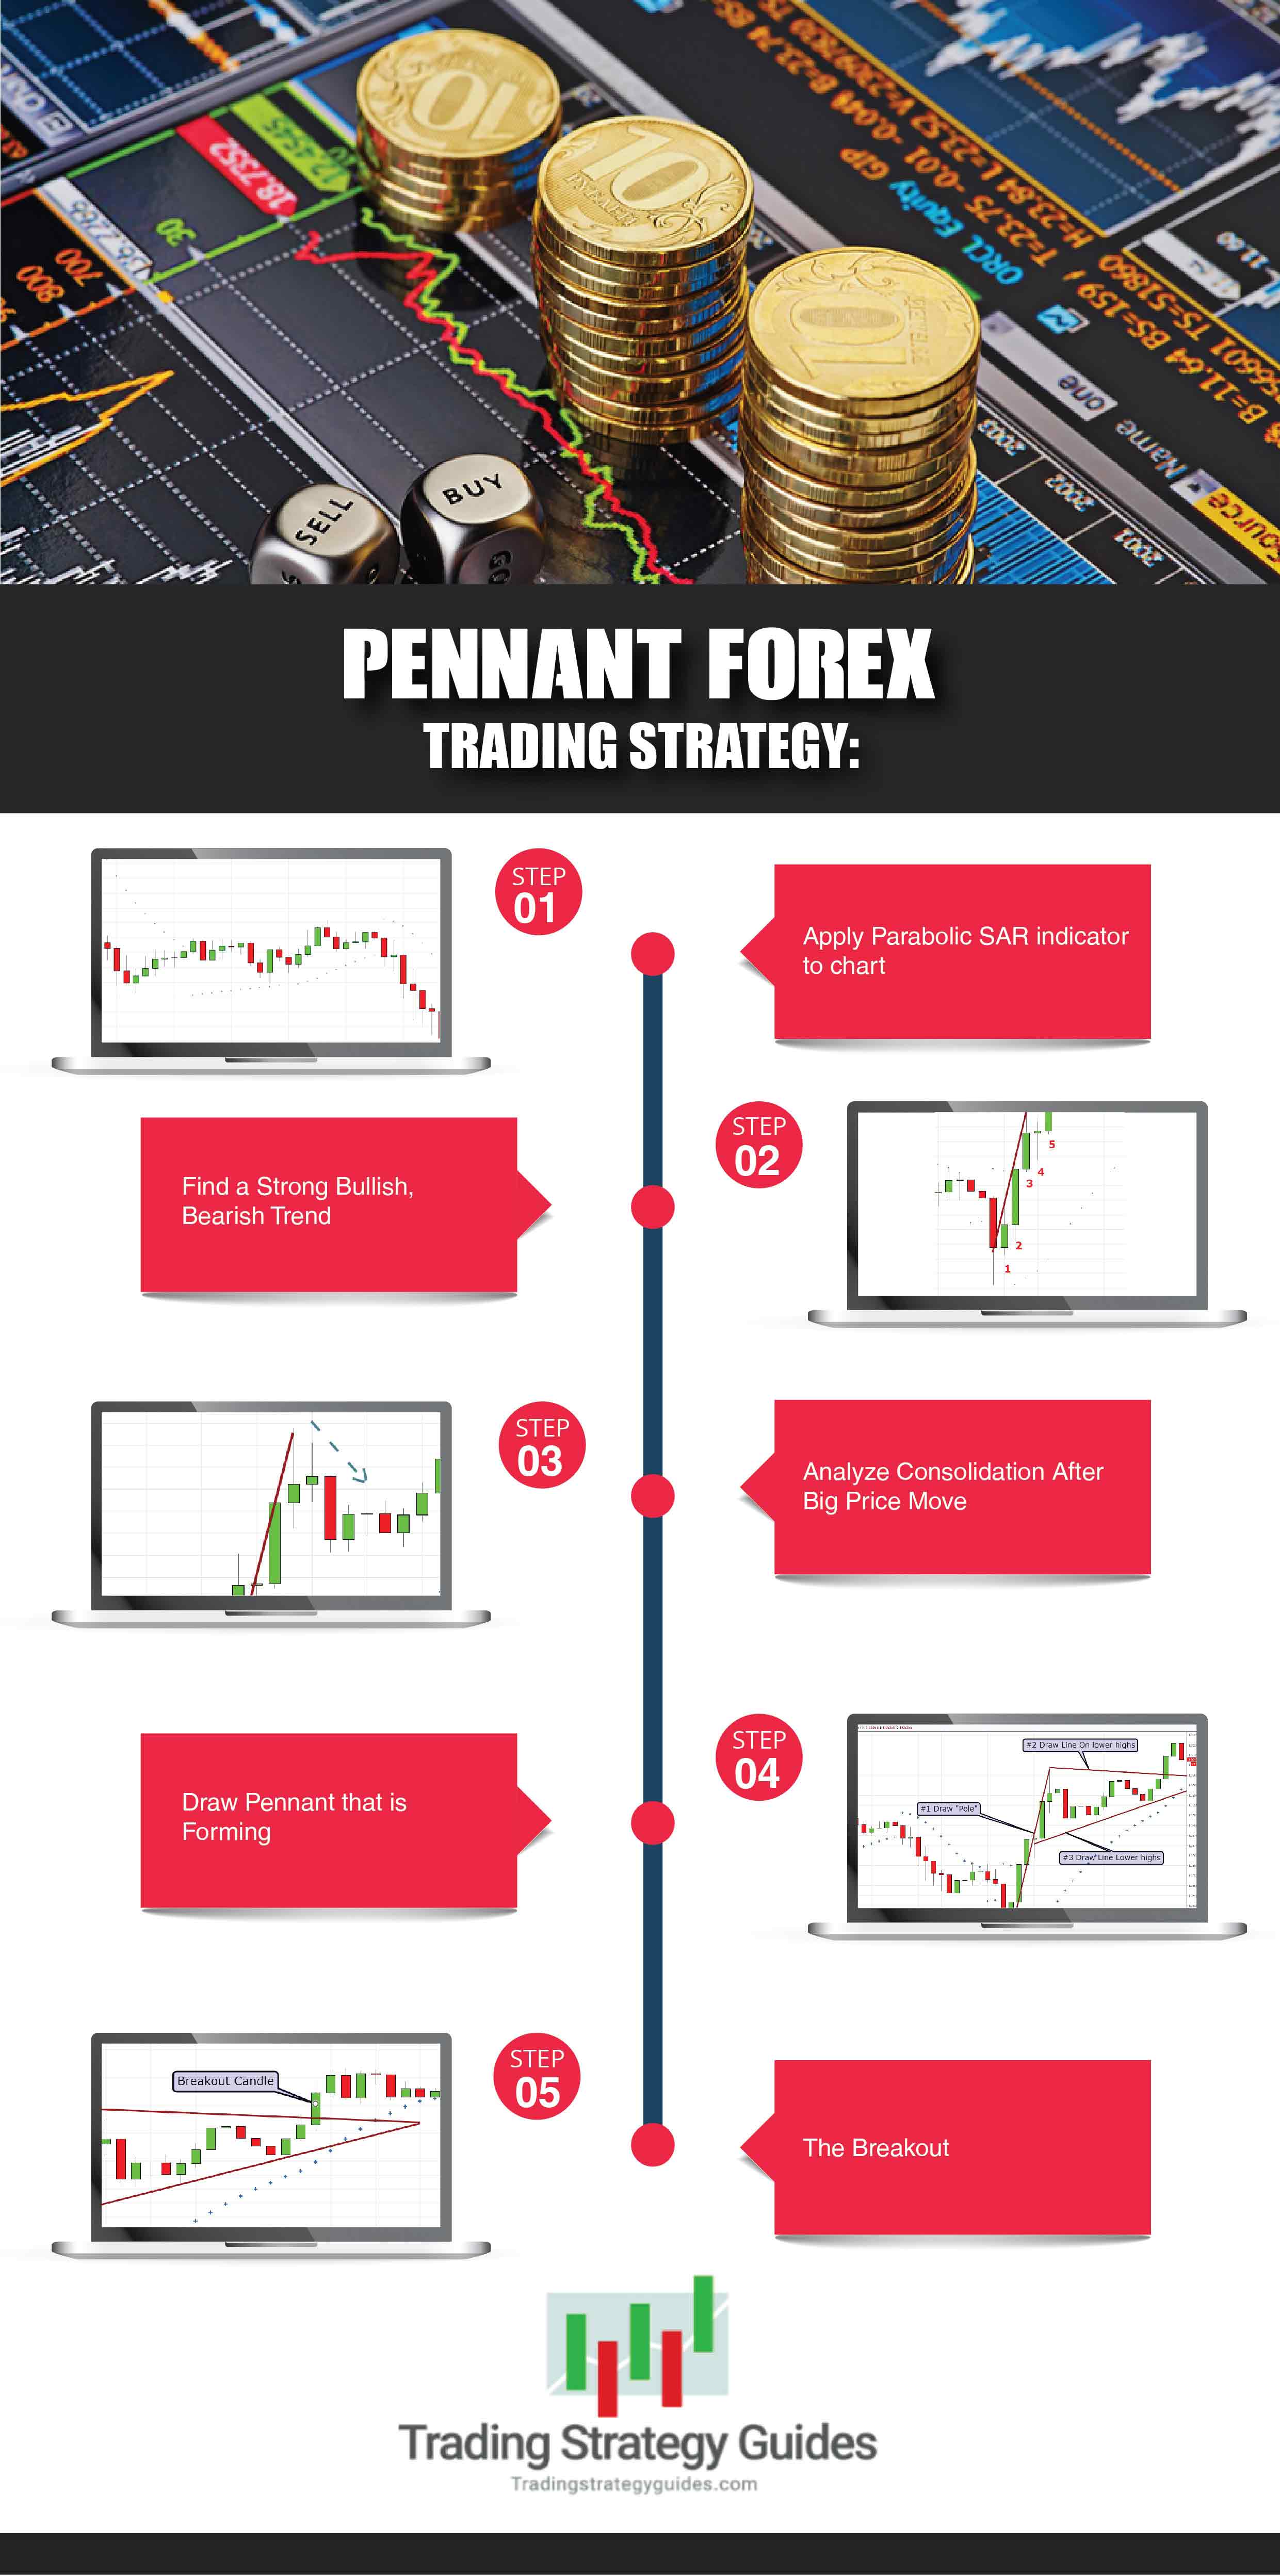 Pennant Forex Trading Infographic